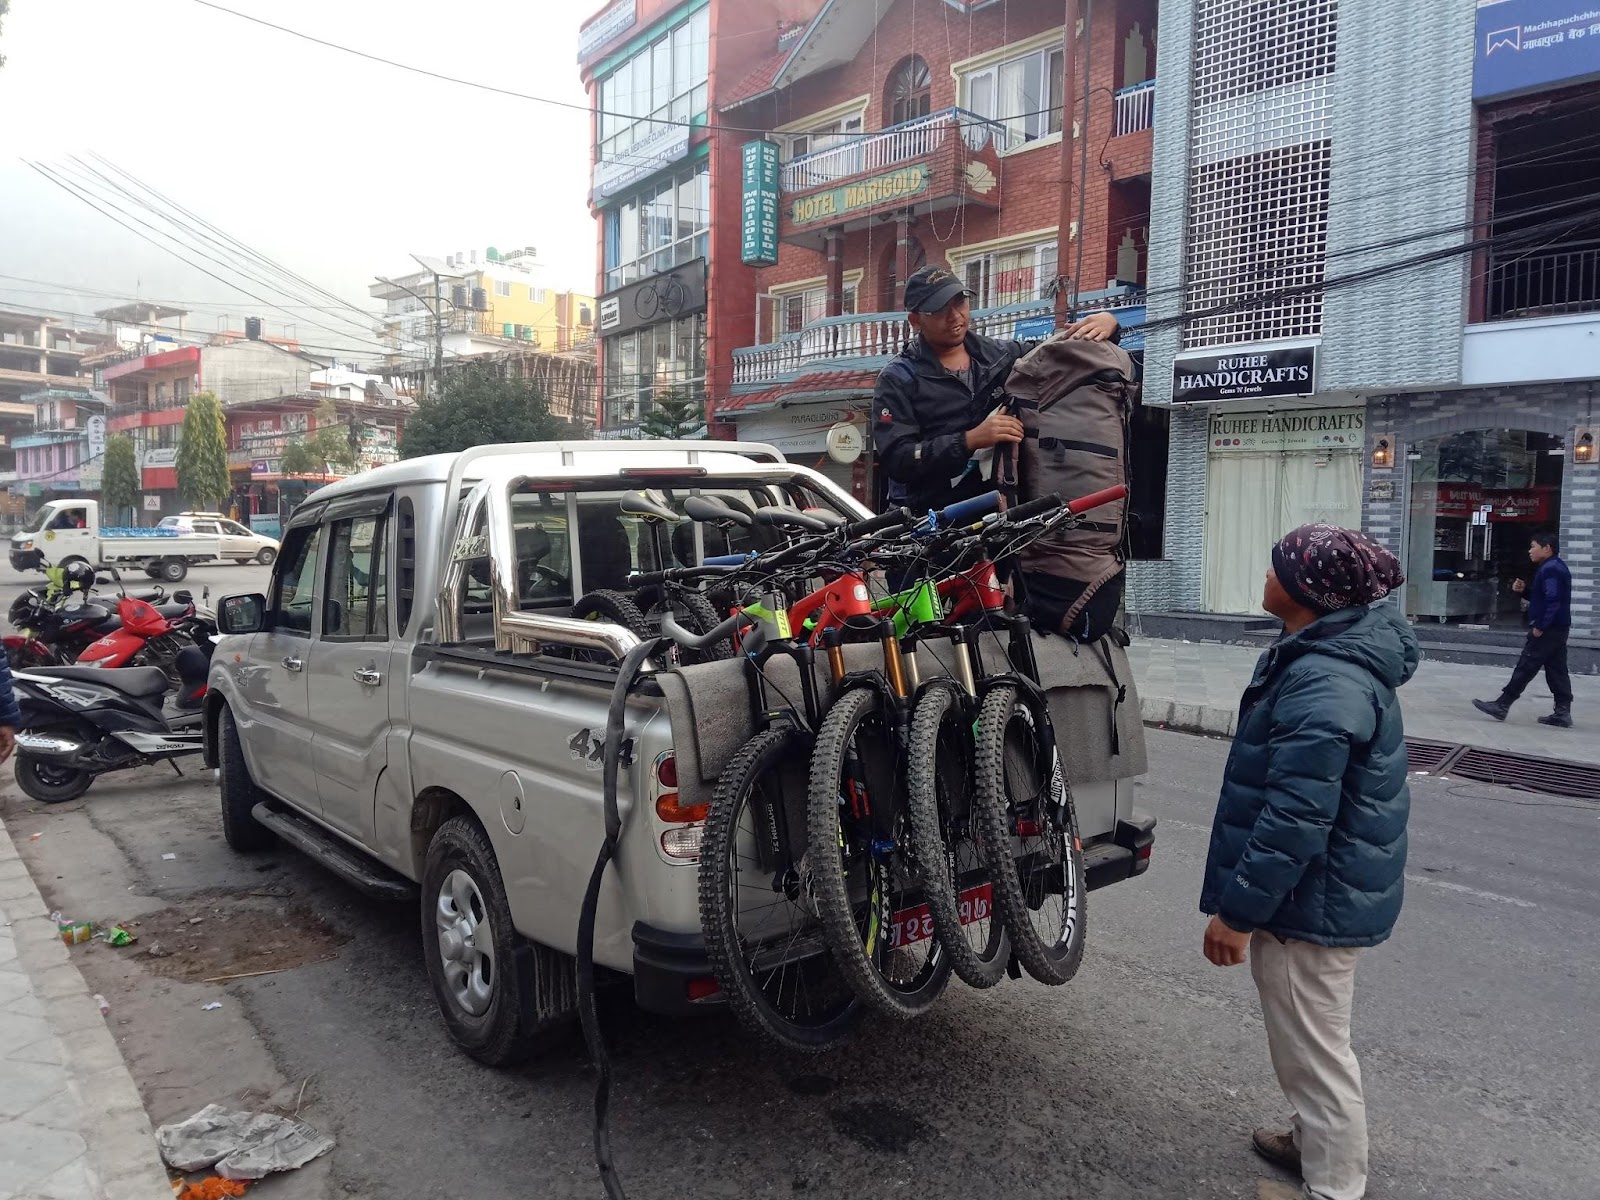 Two supporting staff loading the bikes and bag to start the trip to Annapurna Circuit mountain biking.